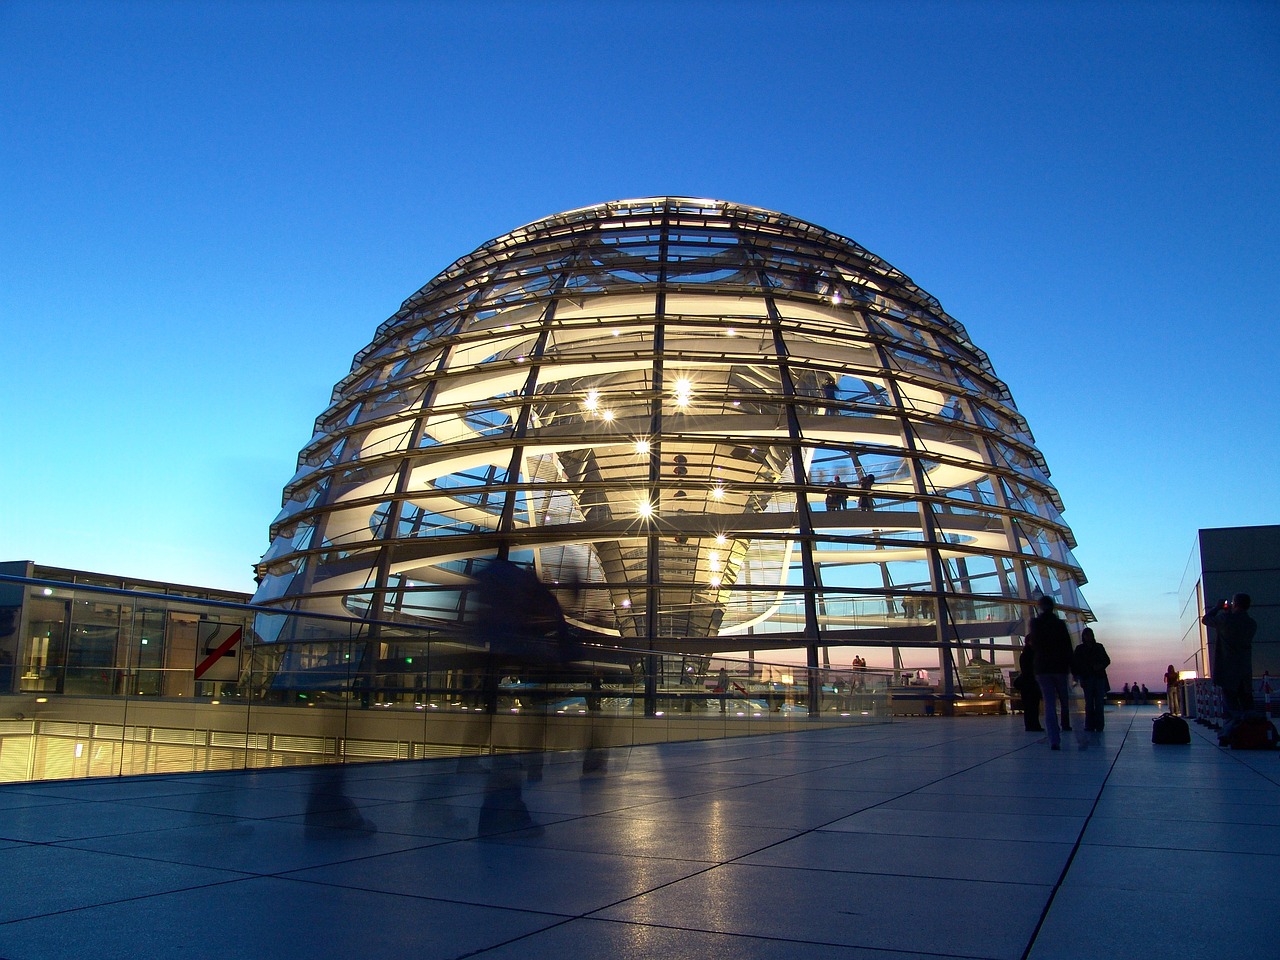 Bundestag policy monitoring and analysis